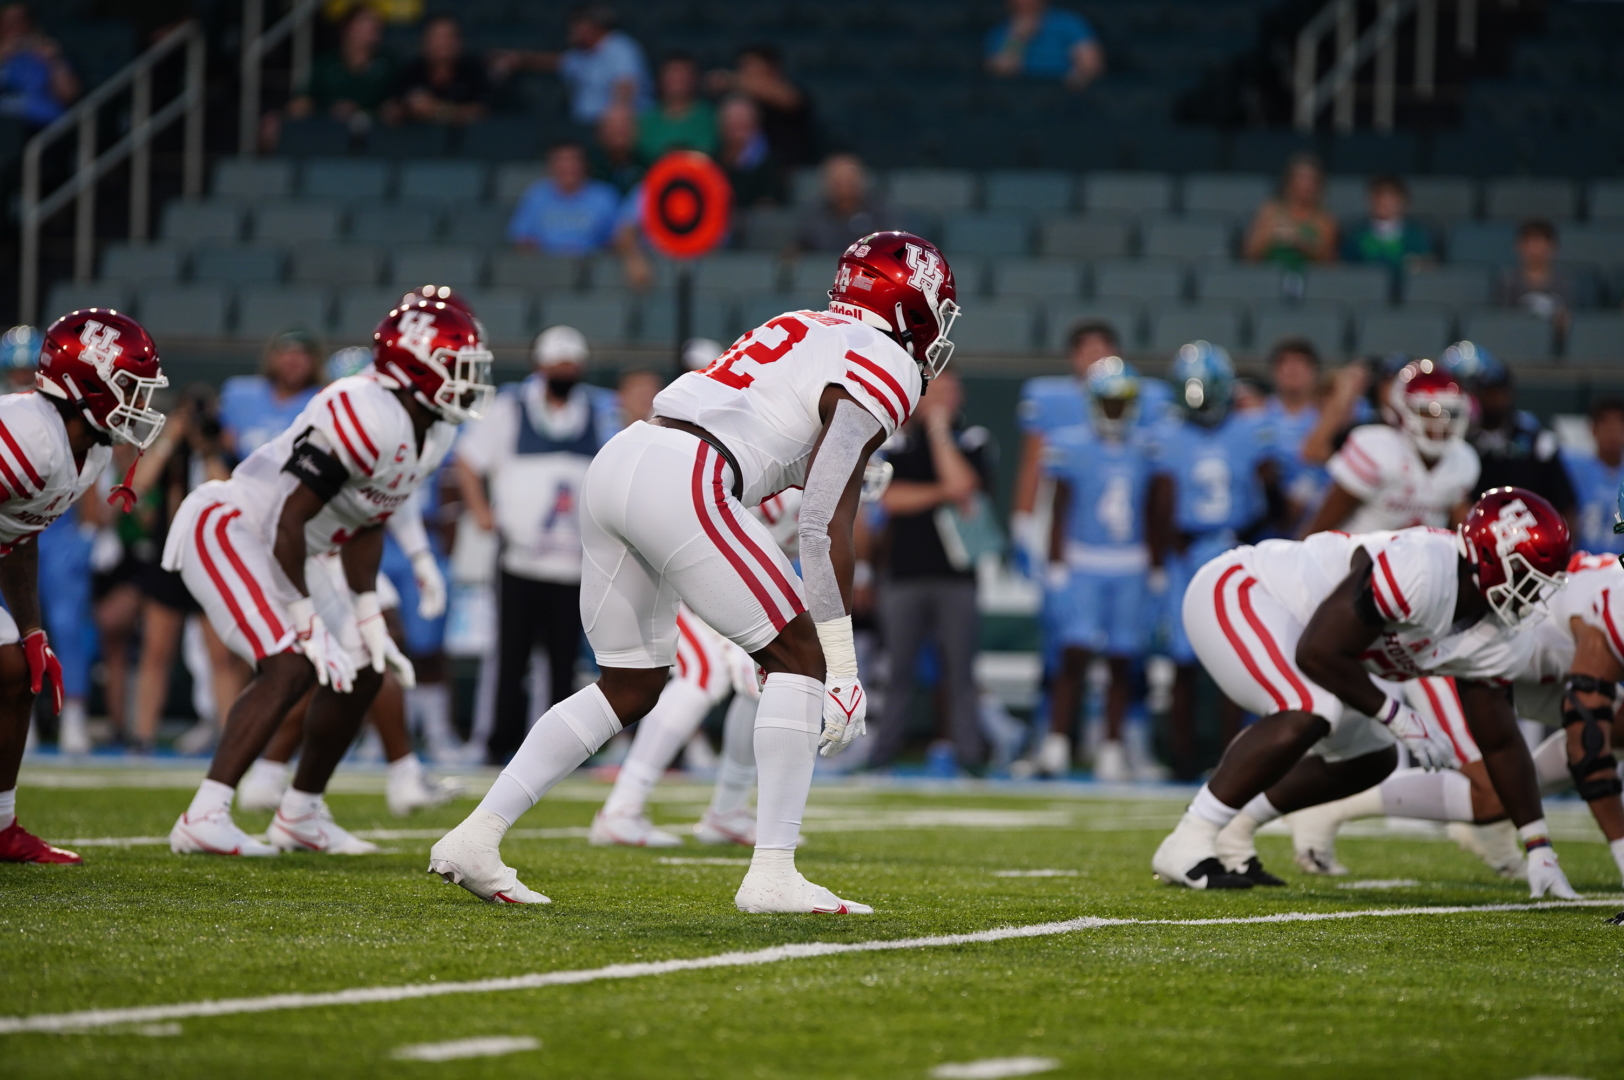 UH football looks to stay perfect in AAC play on Saturday when the Cougars host ECU. | Courtesy of UH athletics